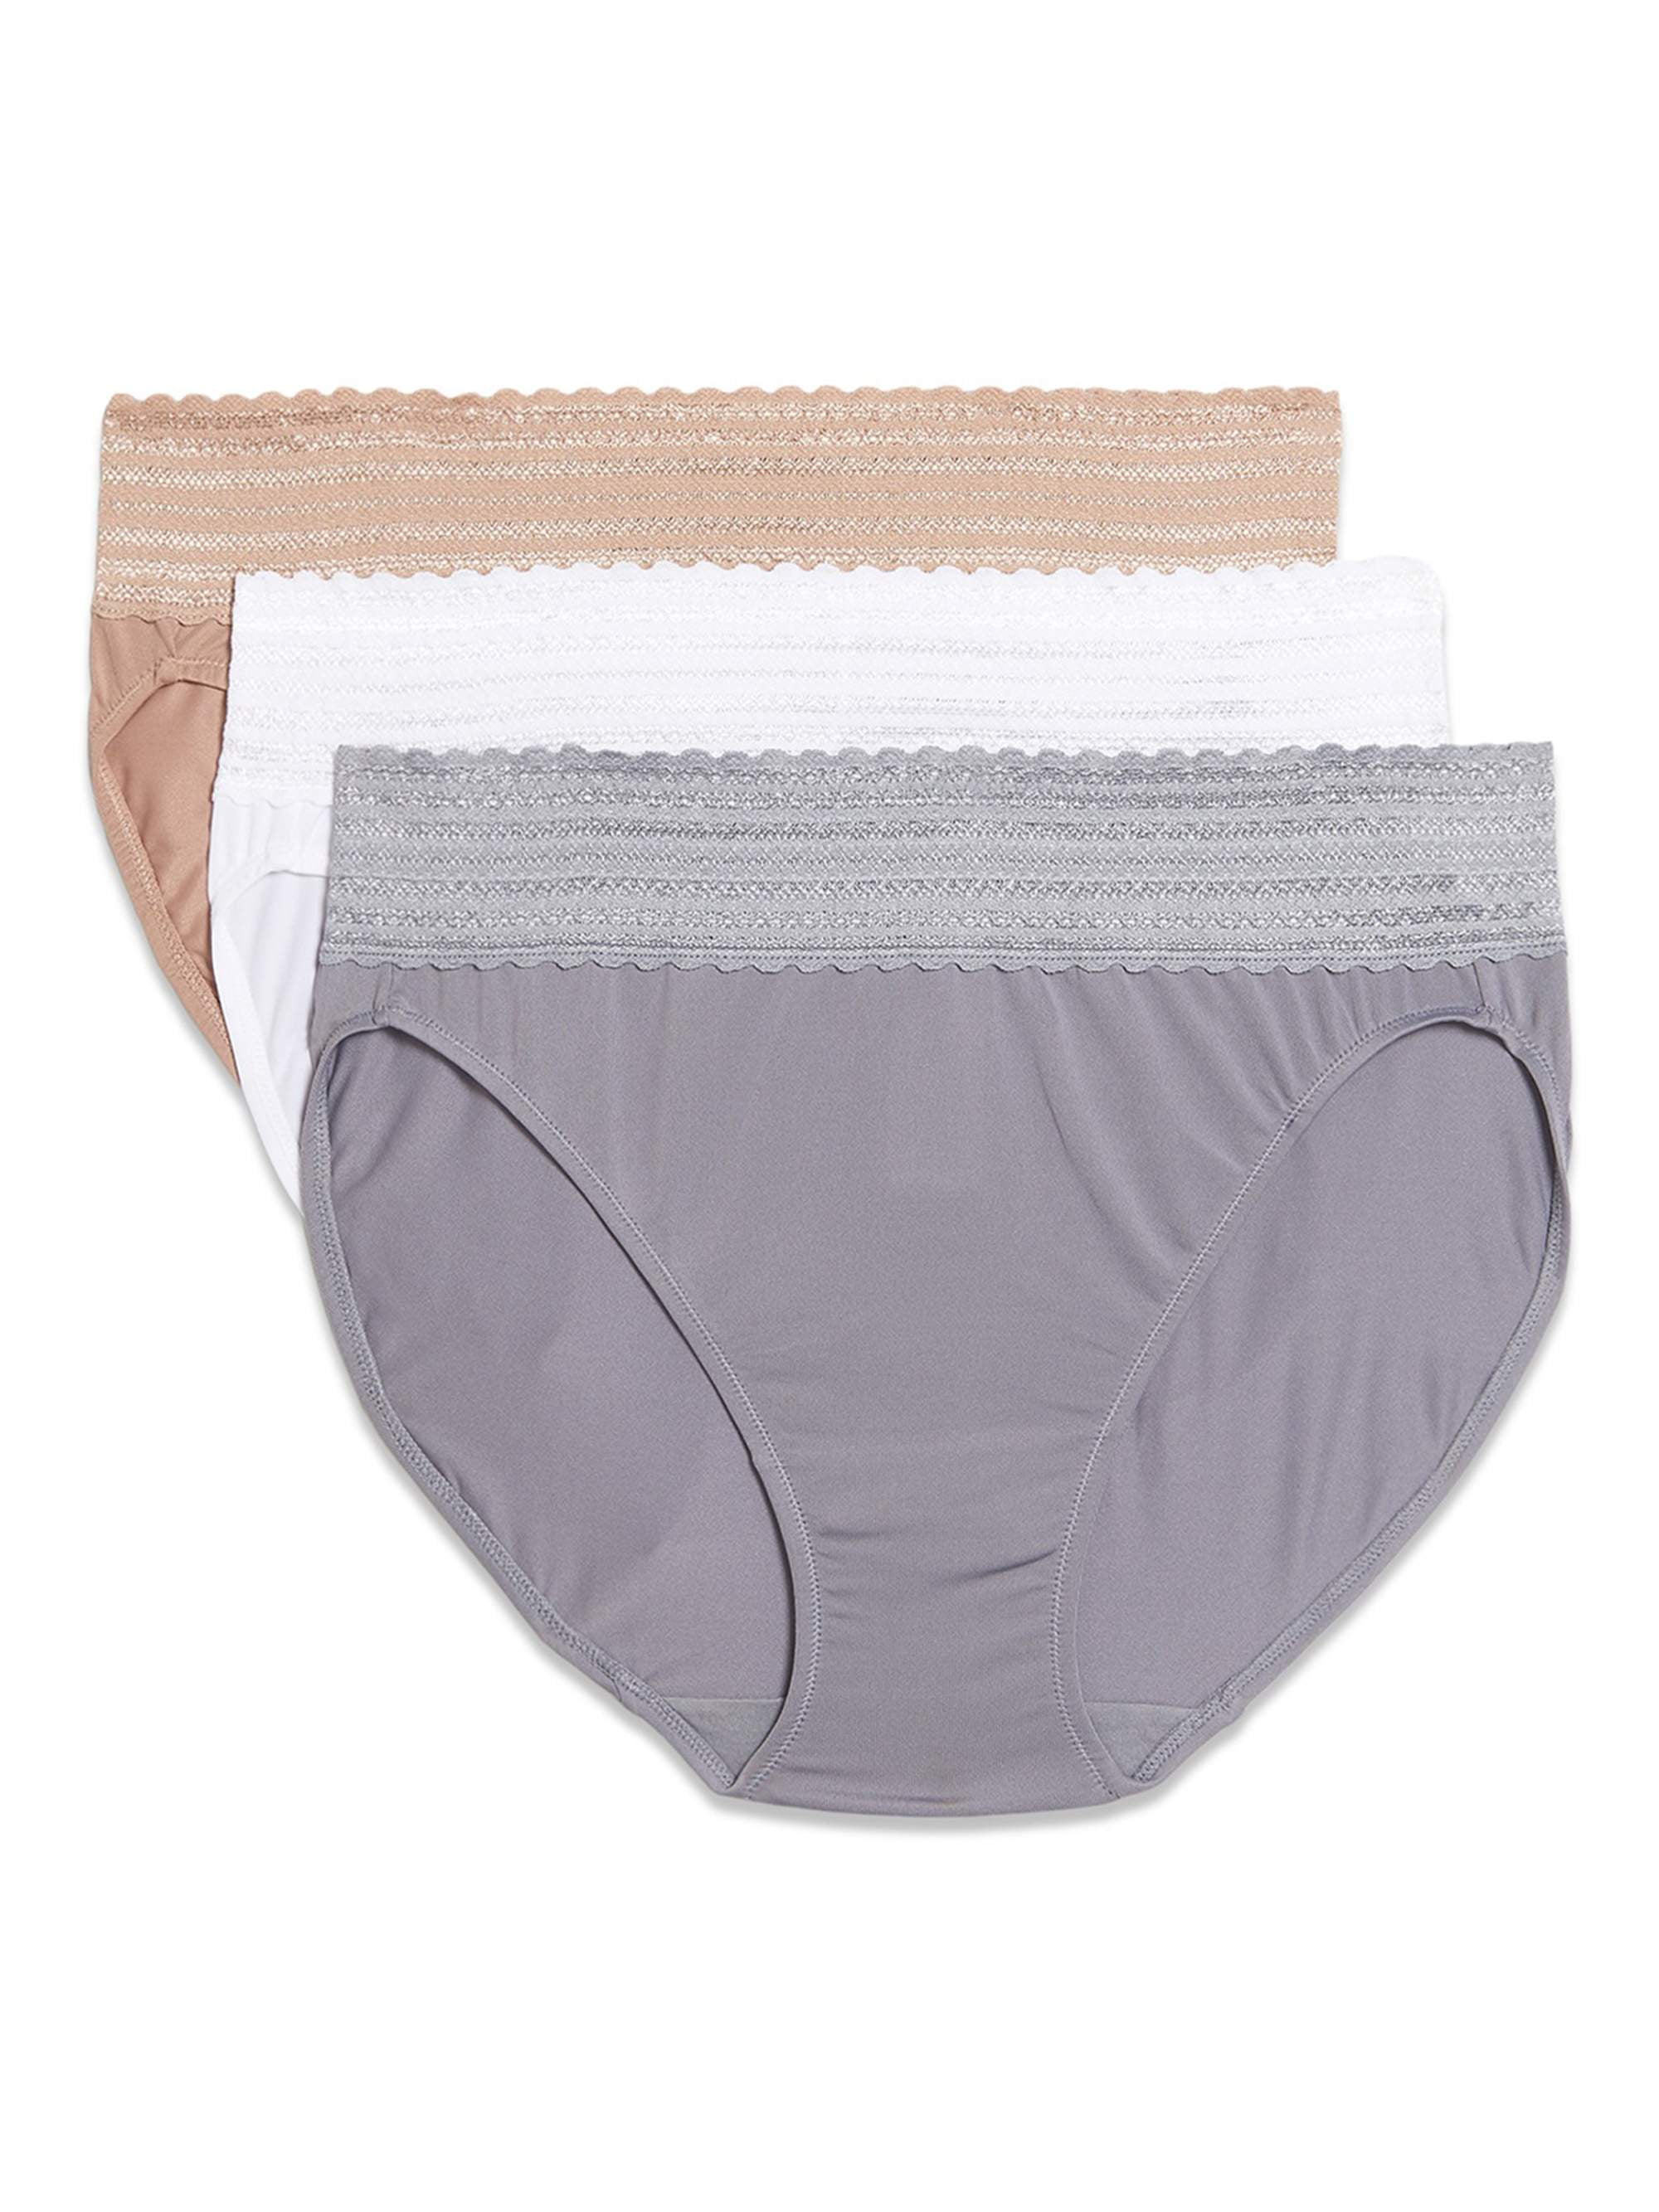 Photo 1 of Blissful Benefits by Warner's Women's No Muffin Top Micro Hi-Cut Panties W/ Lace, 3-Pack